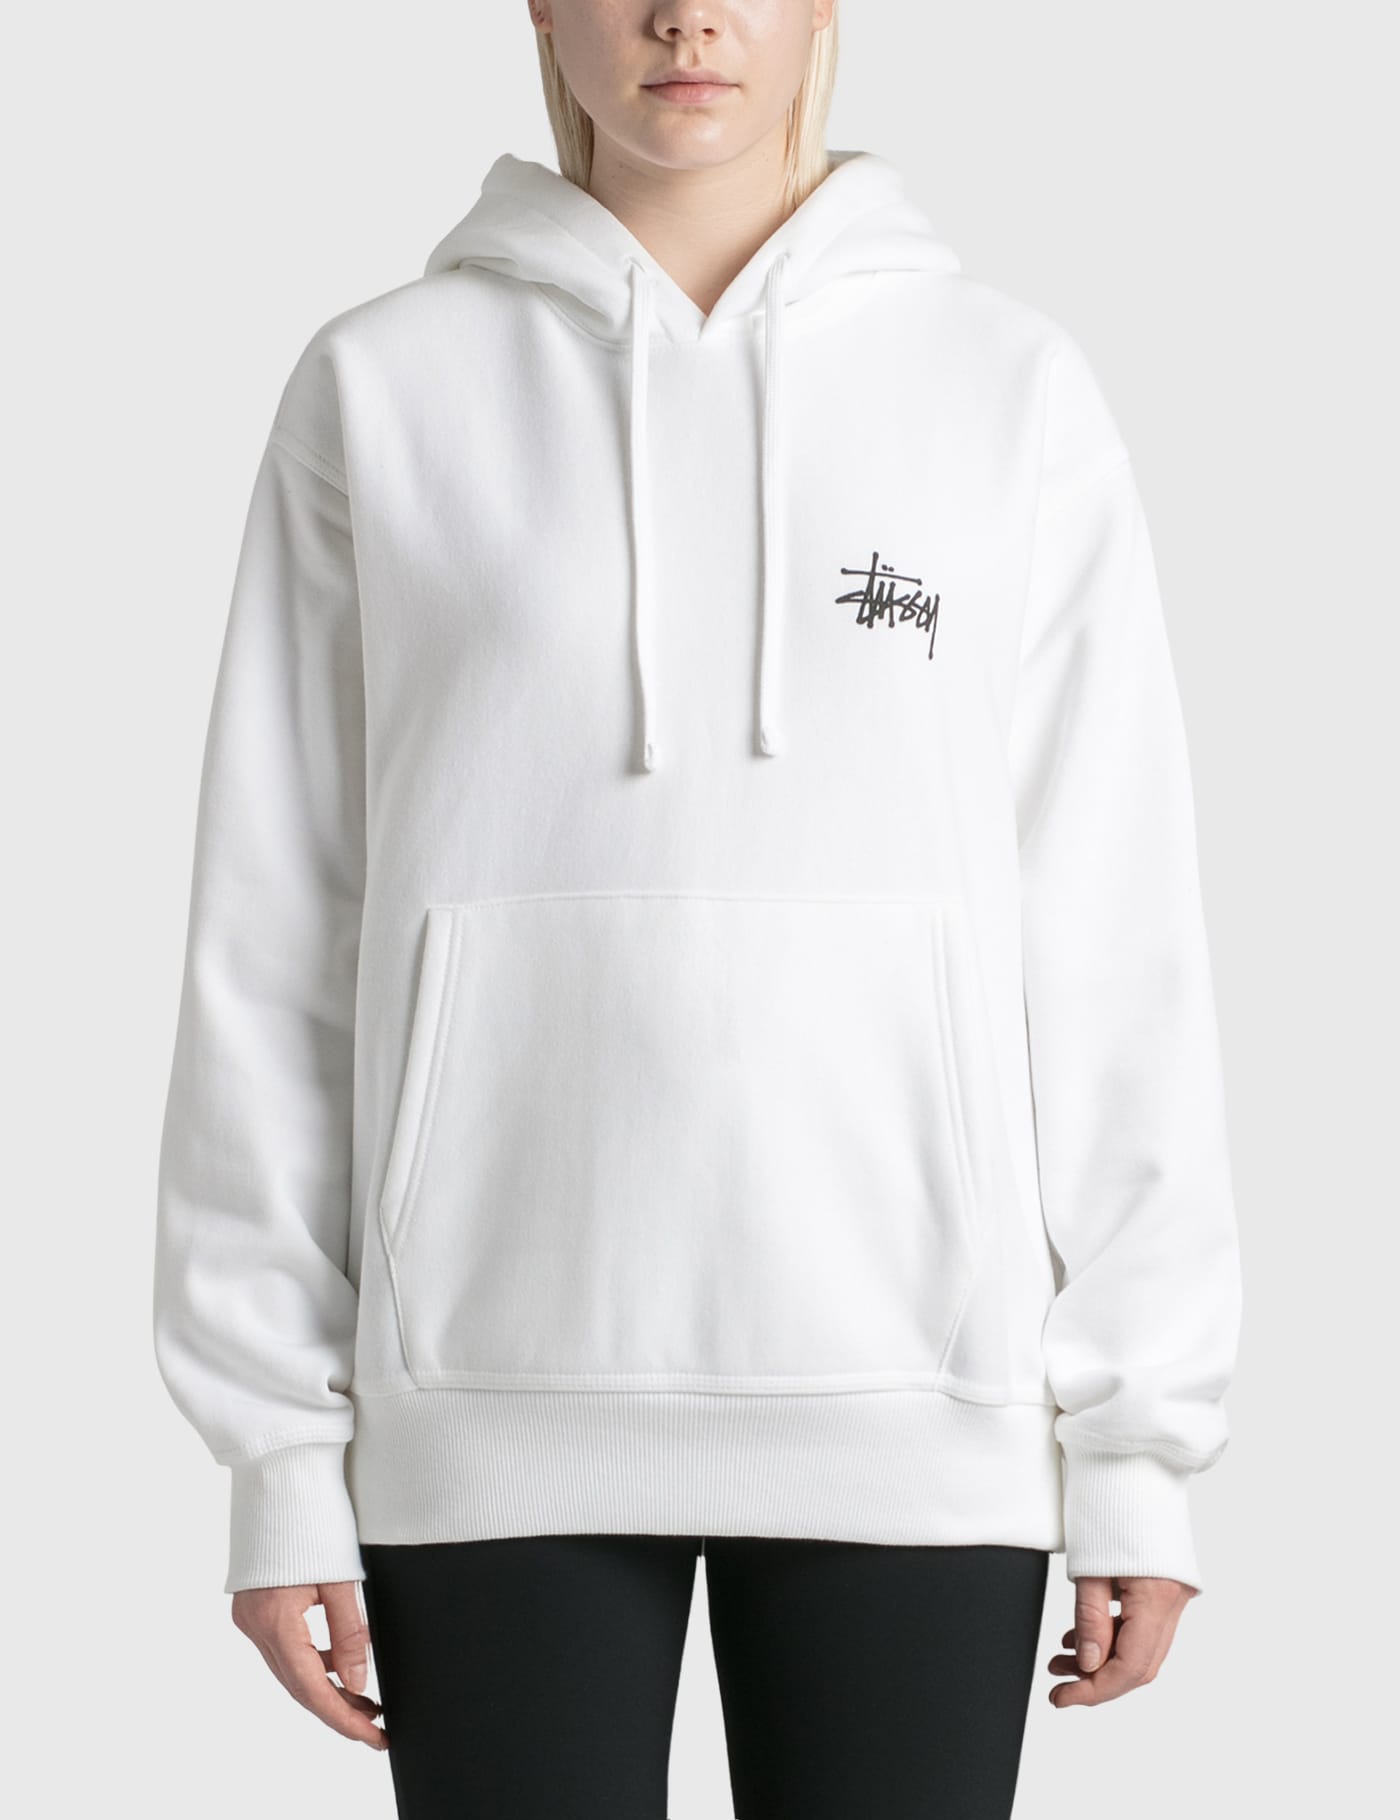 Stussy | HBX - Globally Curated Fashion and Lifestyle by Hypebeast